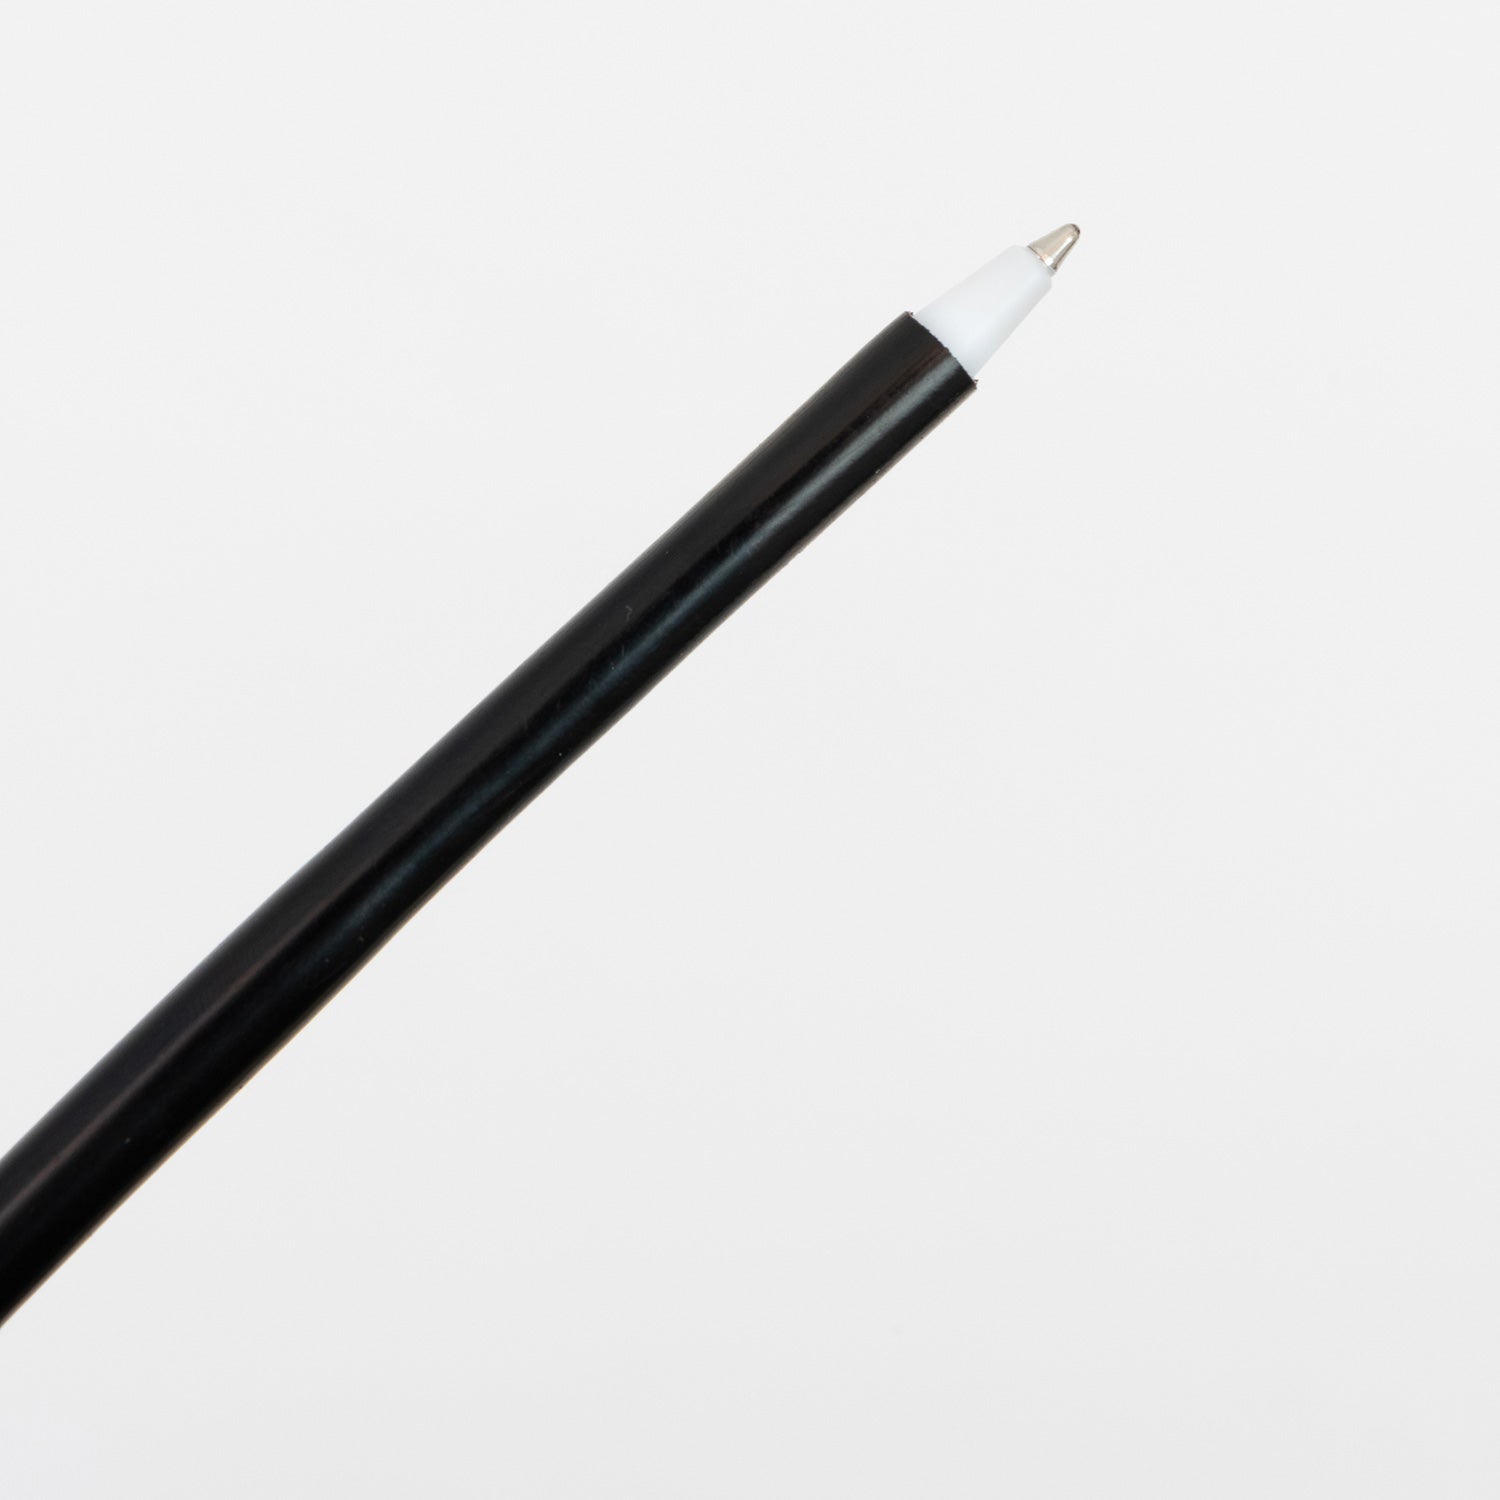 A black quill pen pictured on a white background.